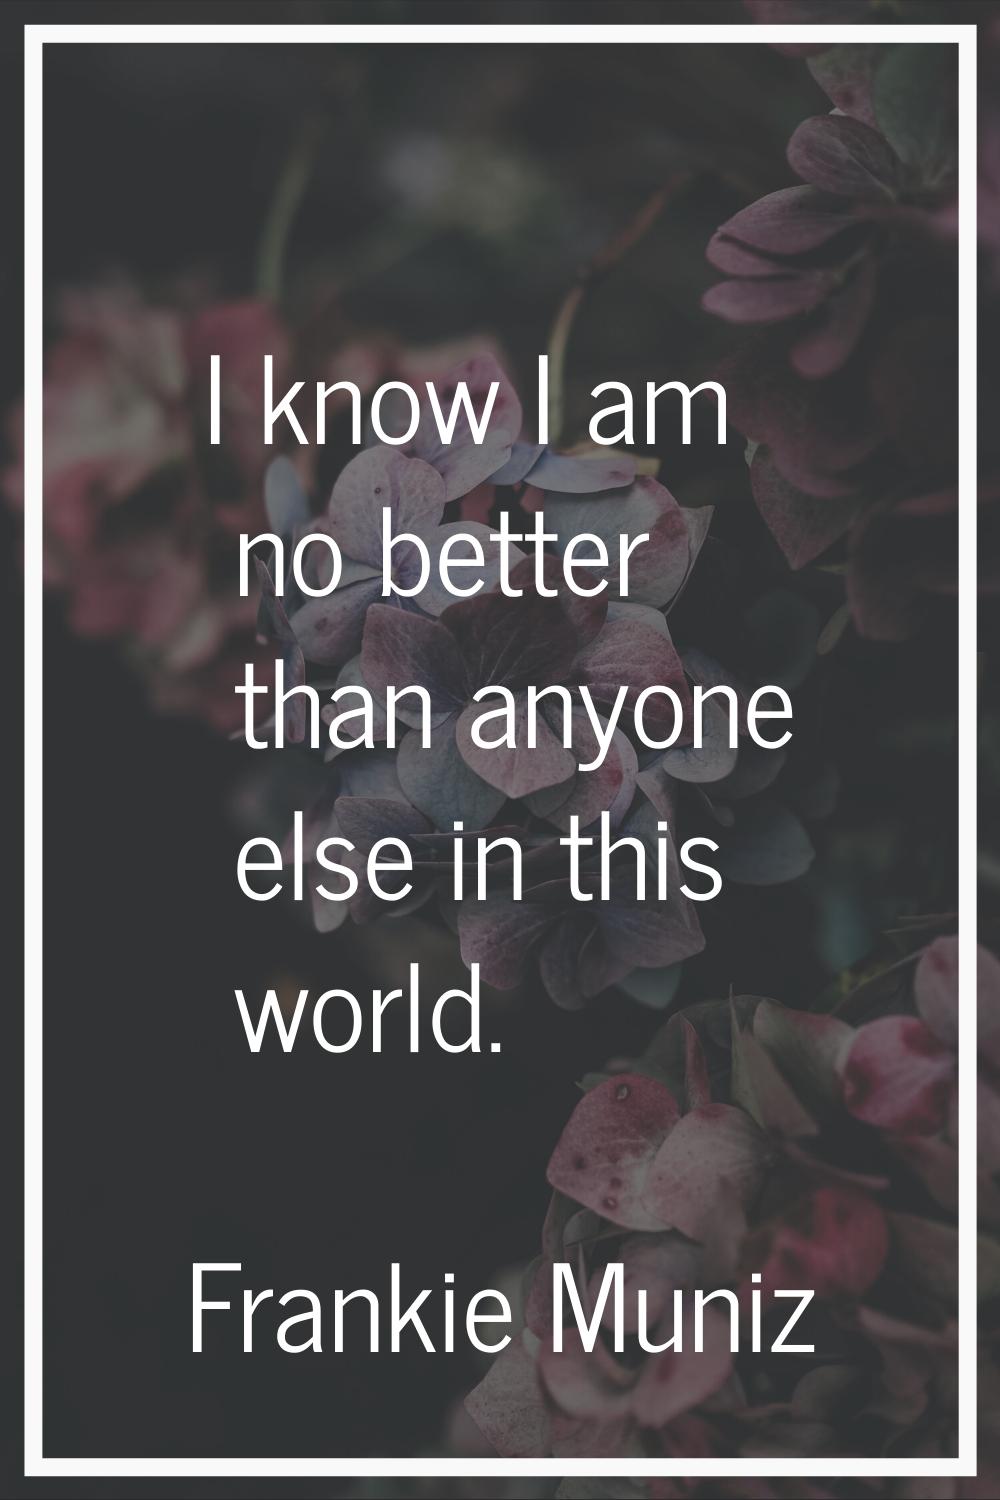 I know I am no better than anyone else in this world.